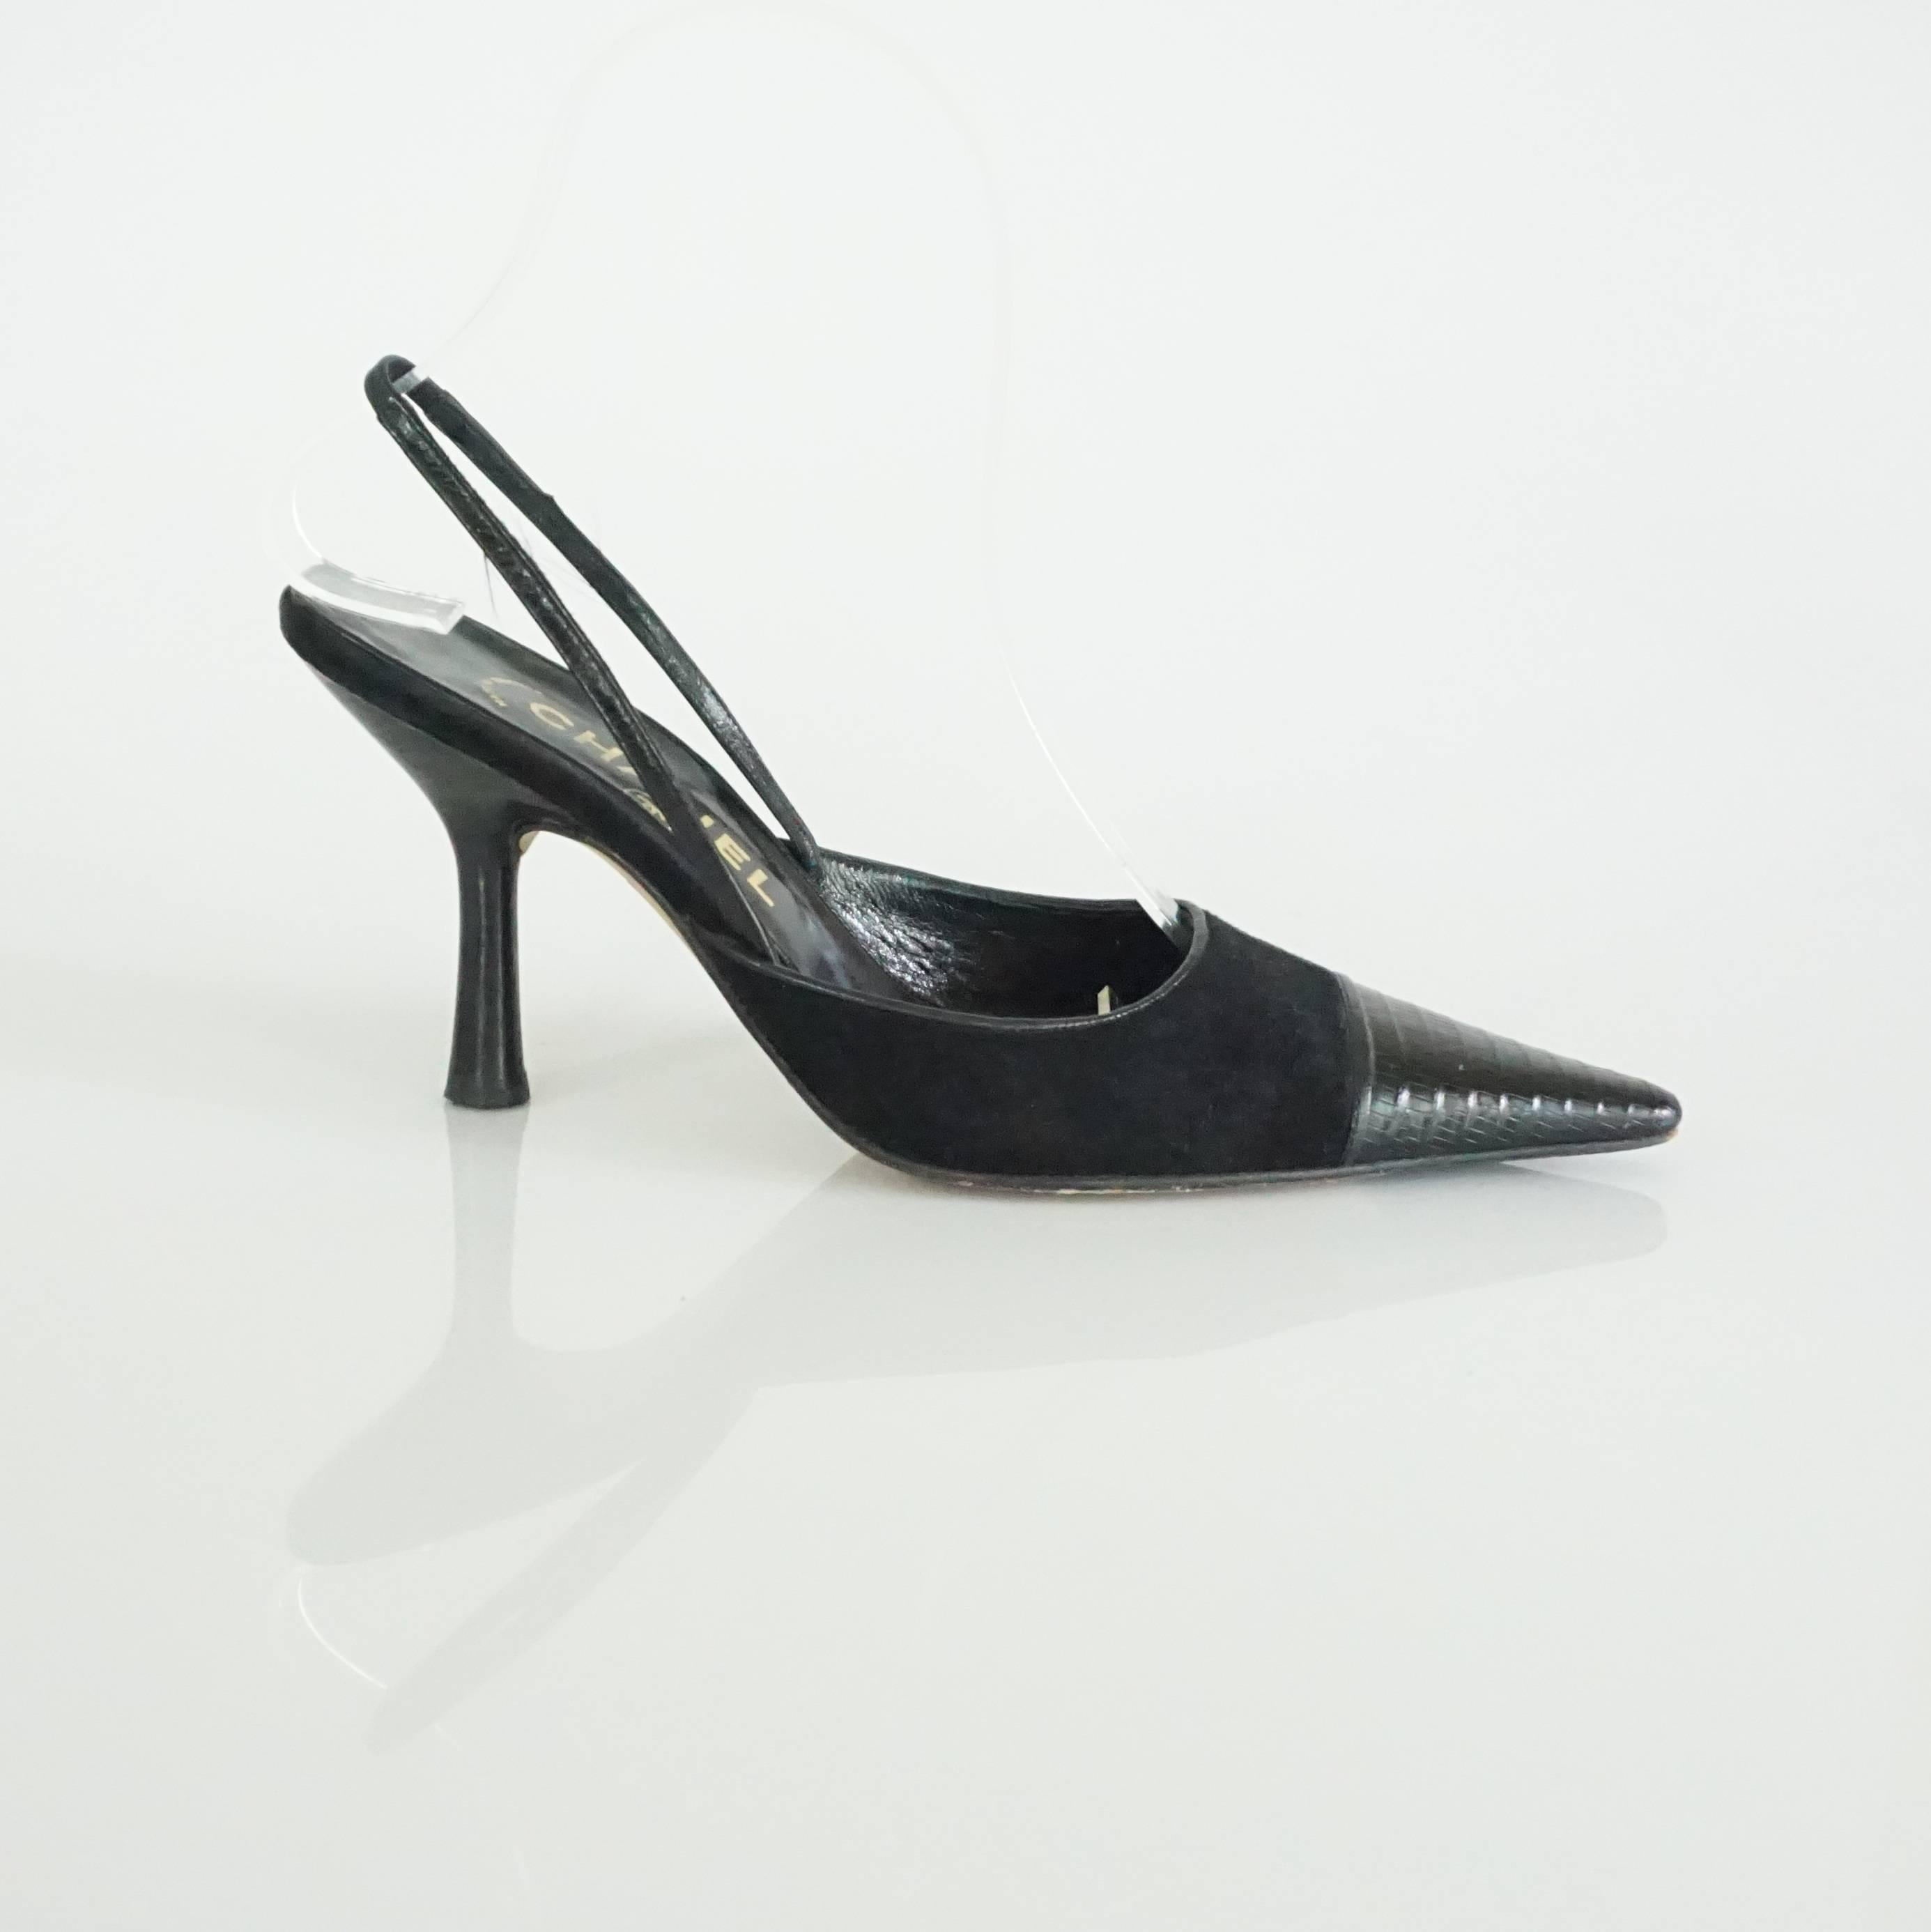 These Chanel black suede slingback heels have a lizard toe. They have a sleek look and are in excellent condition with very minor wear on the back of the heels as shown in the images. Size 37. 

Heel Height: approx 3